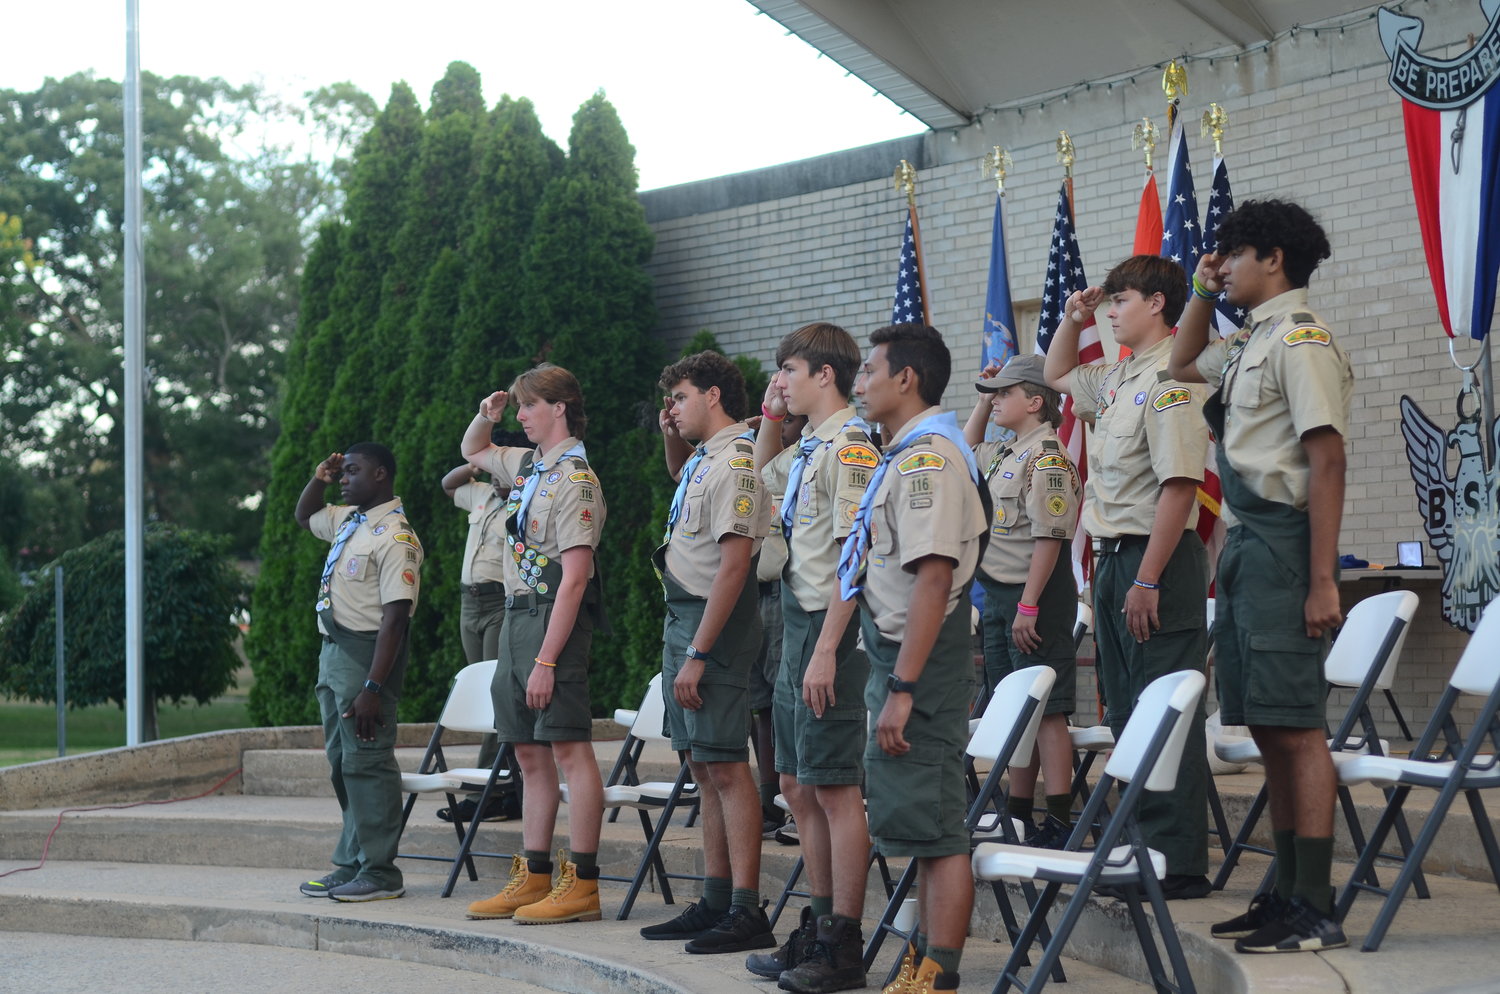 Eagle Scouts Jaden Gabb, Colin McAleer, Drew Mihalick, Daniel Osborn and John Valencia were recognized at an Eagle Court of Honor at the Village Bandshell last Friday in front of a crowd of family members and current and former scouts.